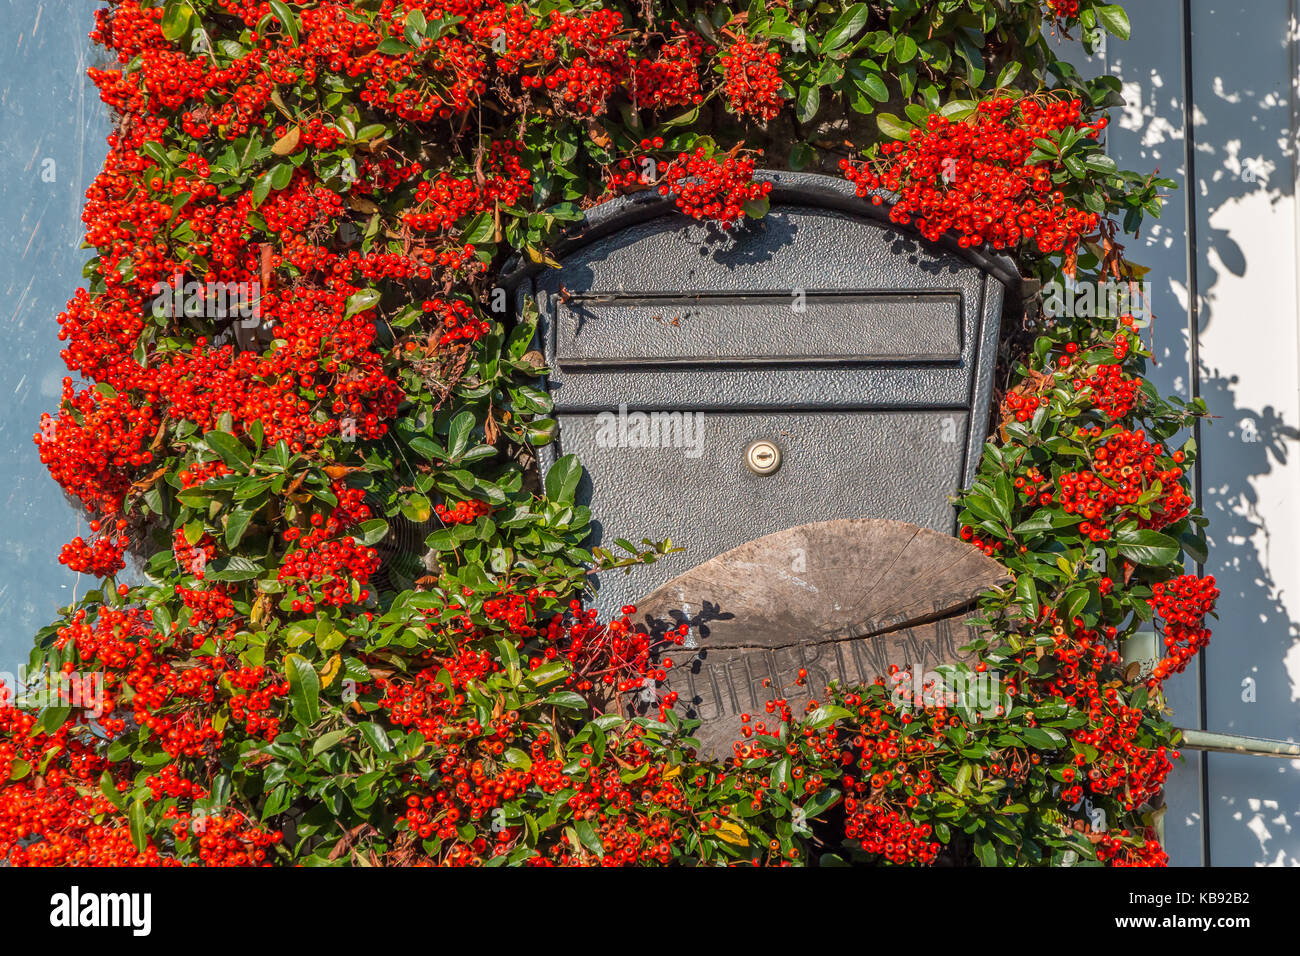 Autumn Colour, brilliant red berries on a Pyracantha (Firethorn) plant surrounding a mail box September 2017 Stock Photo